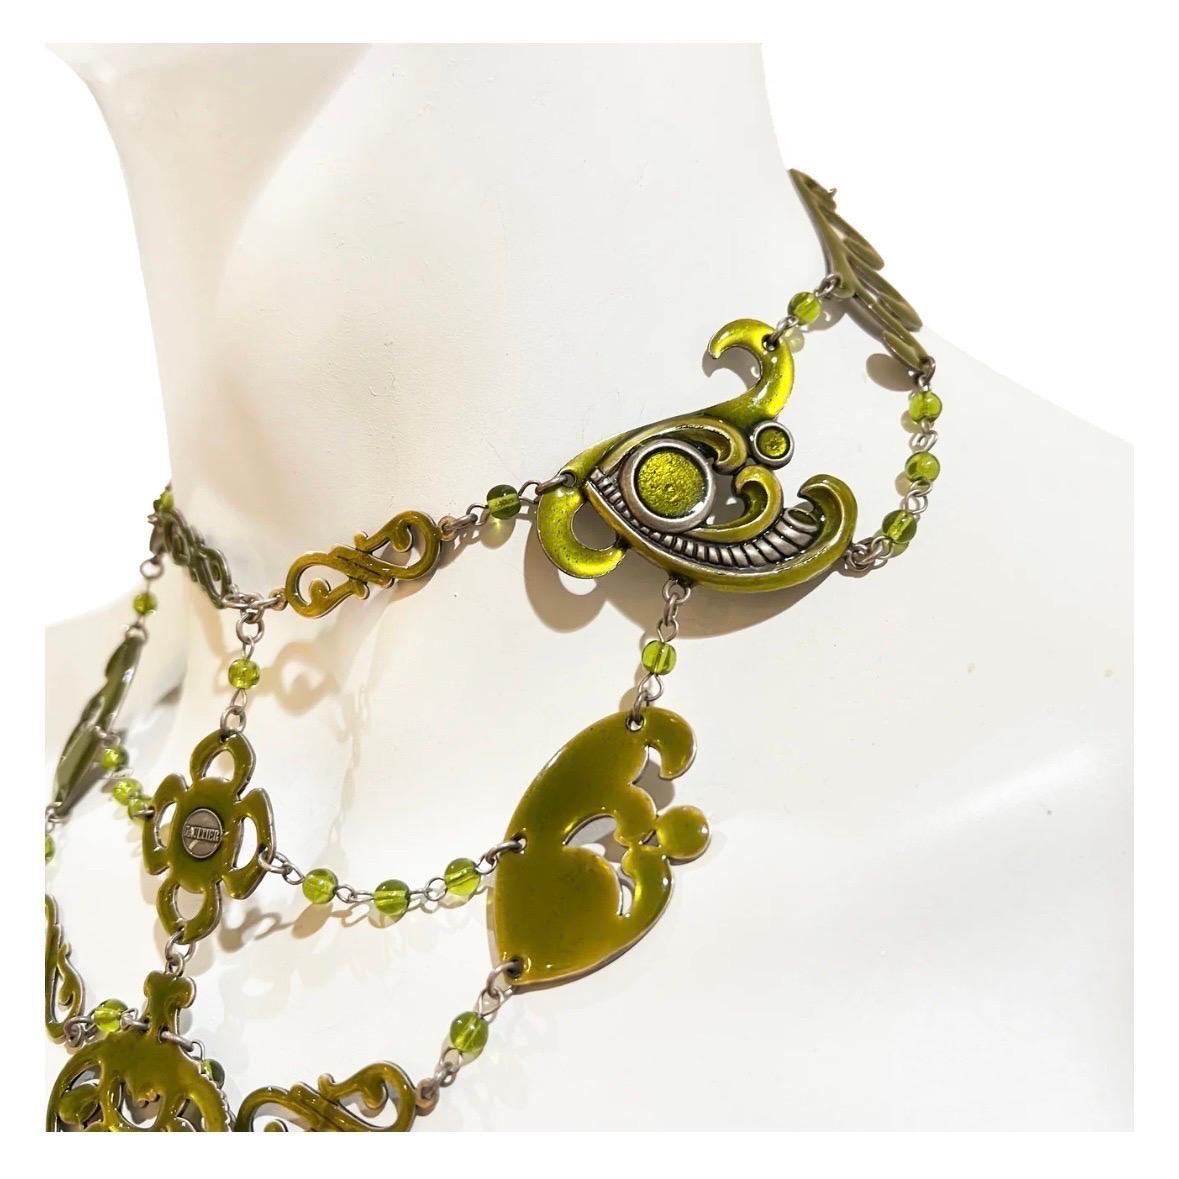 Paisley Cutout Tiered Necklace by Jean Paul Gaultier
Circa 1995
Made in France
Paisley shaped metal pieces covered in chartreuse enamel 
Pieces attached by tiered metal chains with chartreuse beads 
Adjustable length 
Lobster claw clasp closure